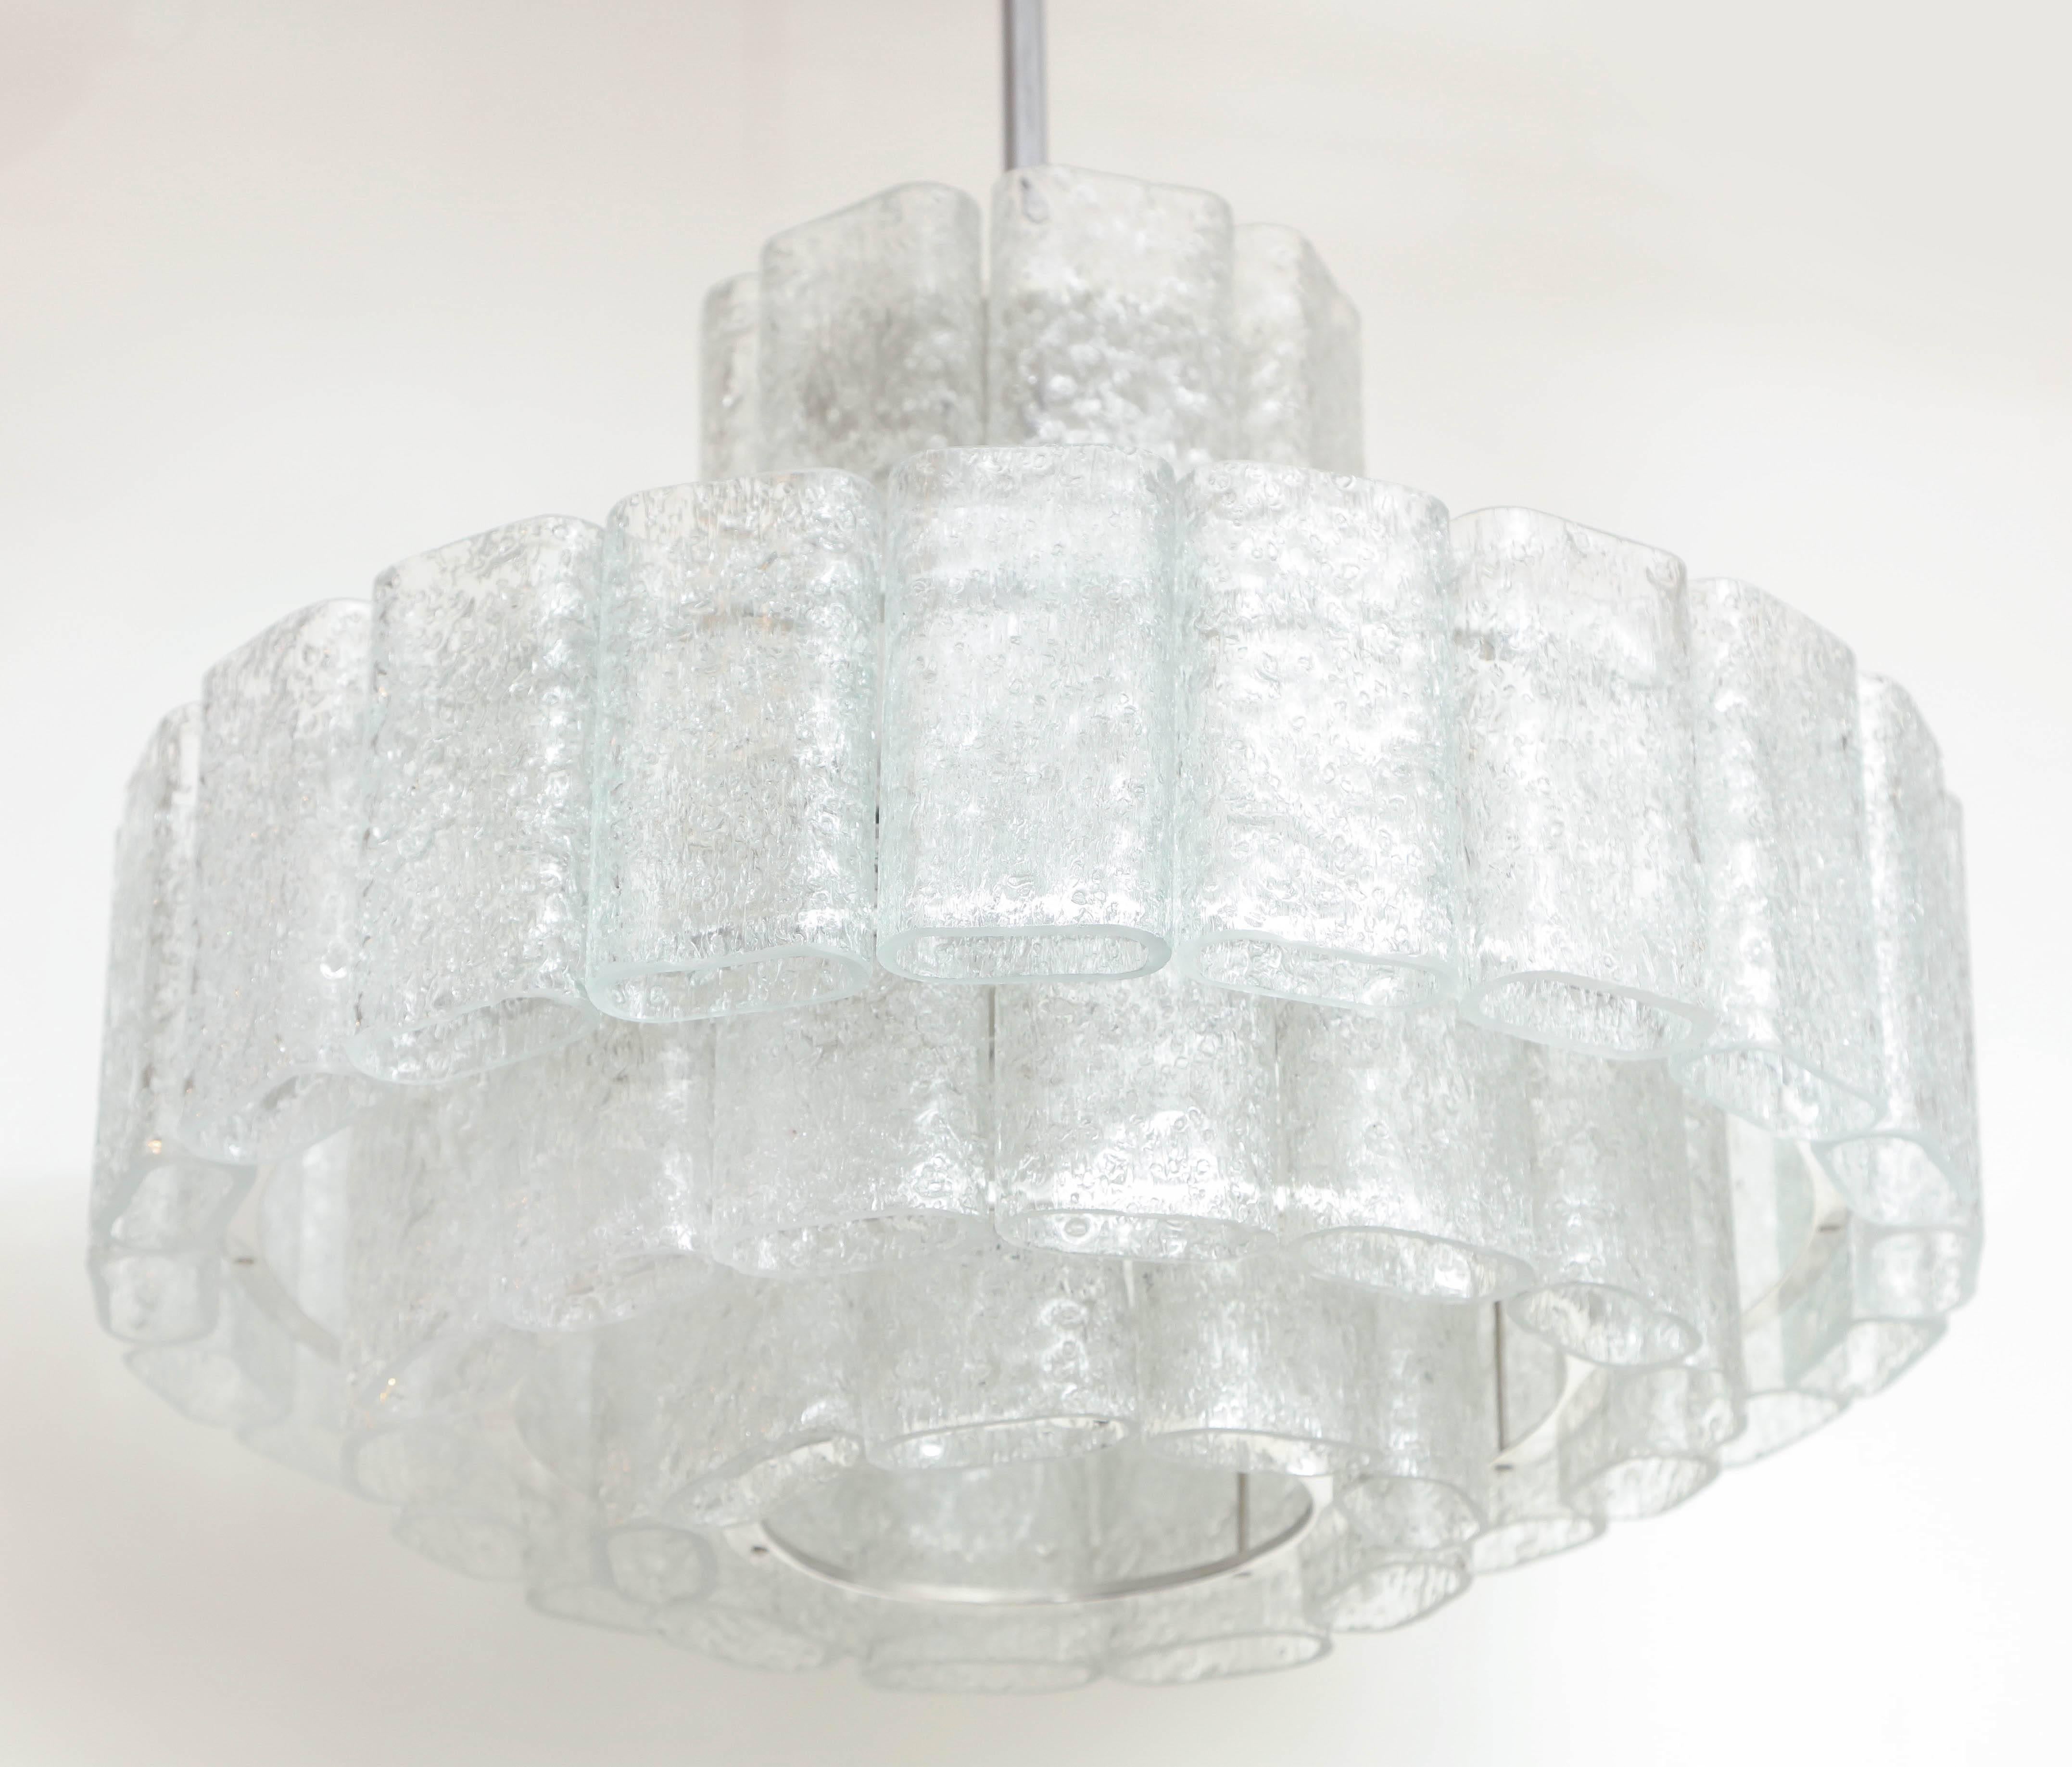 Modernist chandelier composed of four tiers of oblong shaped ice glass elements. Chandelier is suspended from a polished nickel stem and canopy. Rewired for use in the USA. Chandelier measures 31